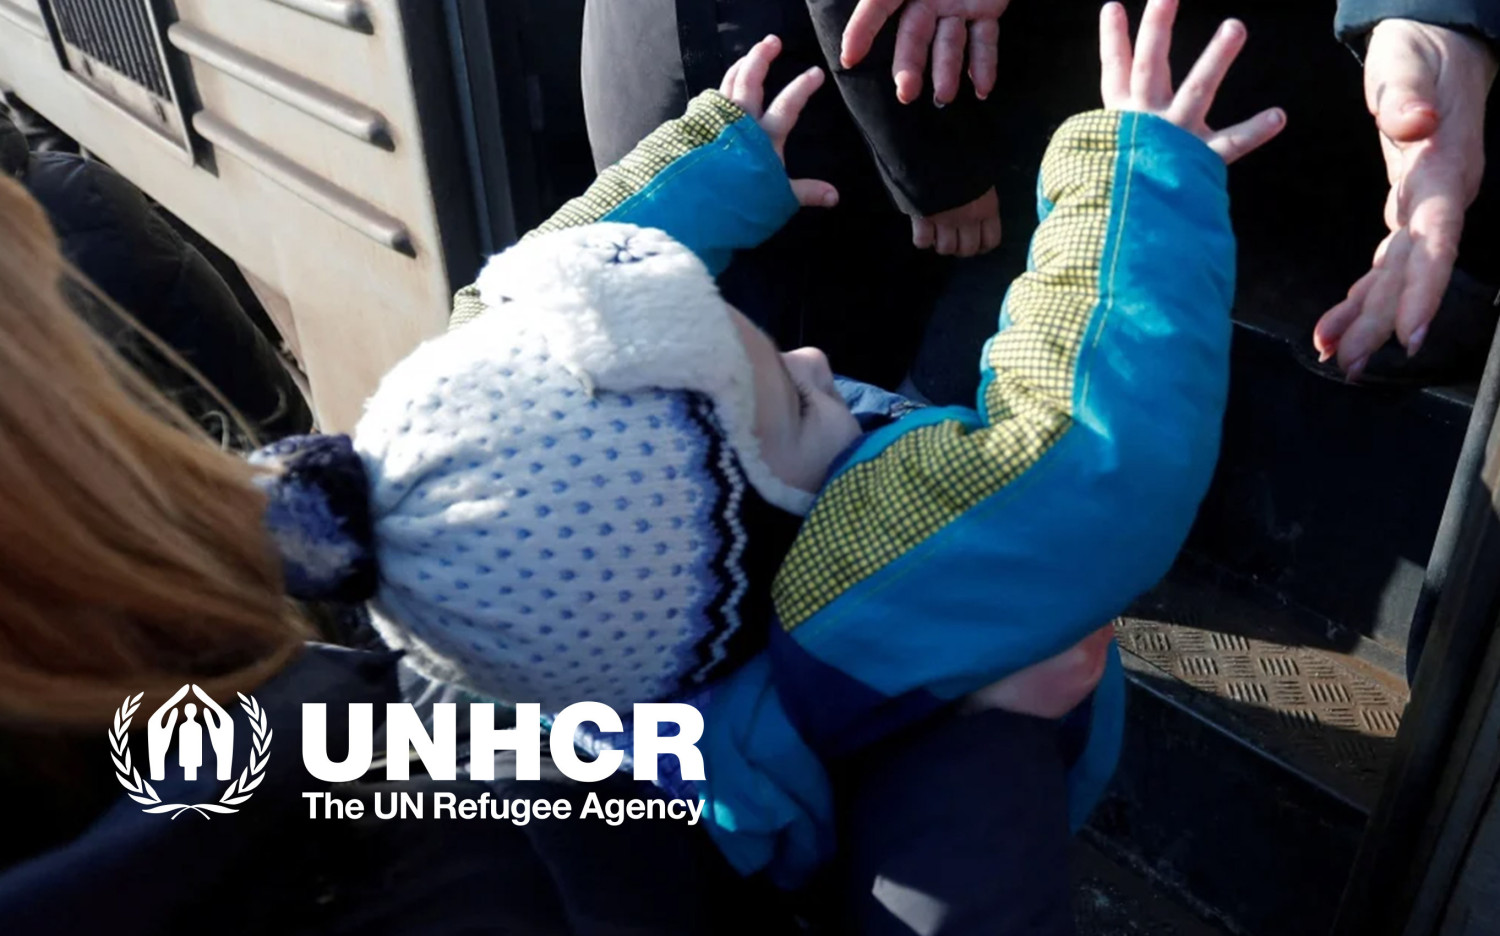 GoldenPeaks Capital Foundation supports UNHCR Switzerland for The UN Refugee Agency in the Ukraine